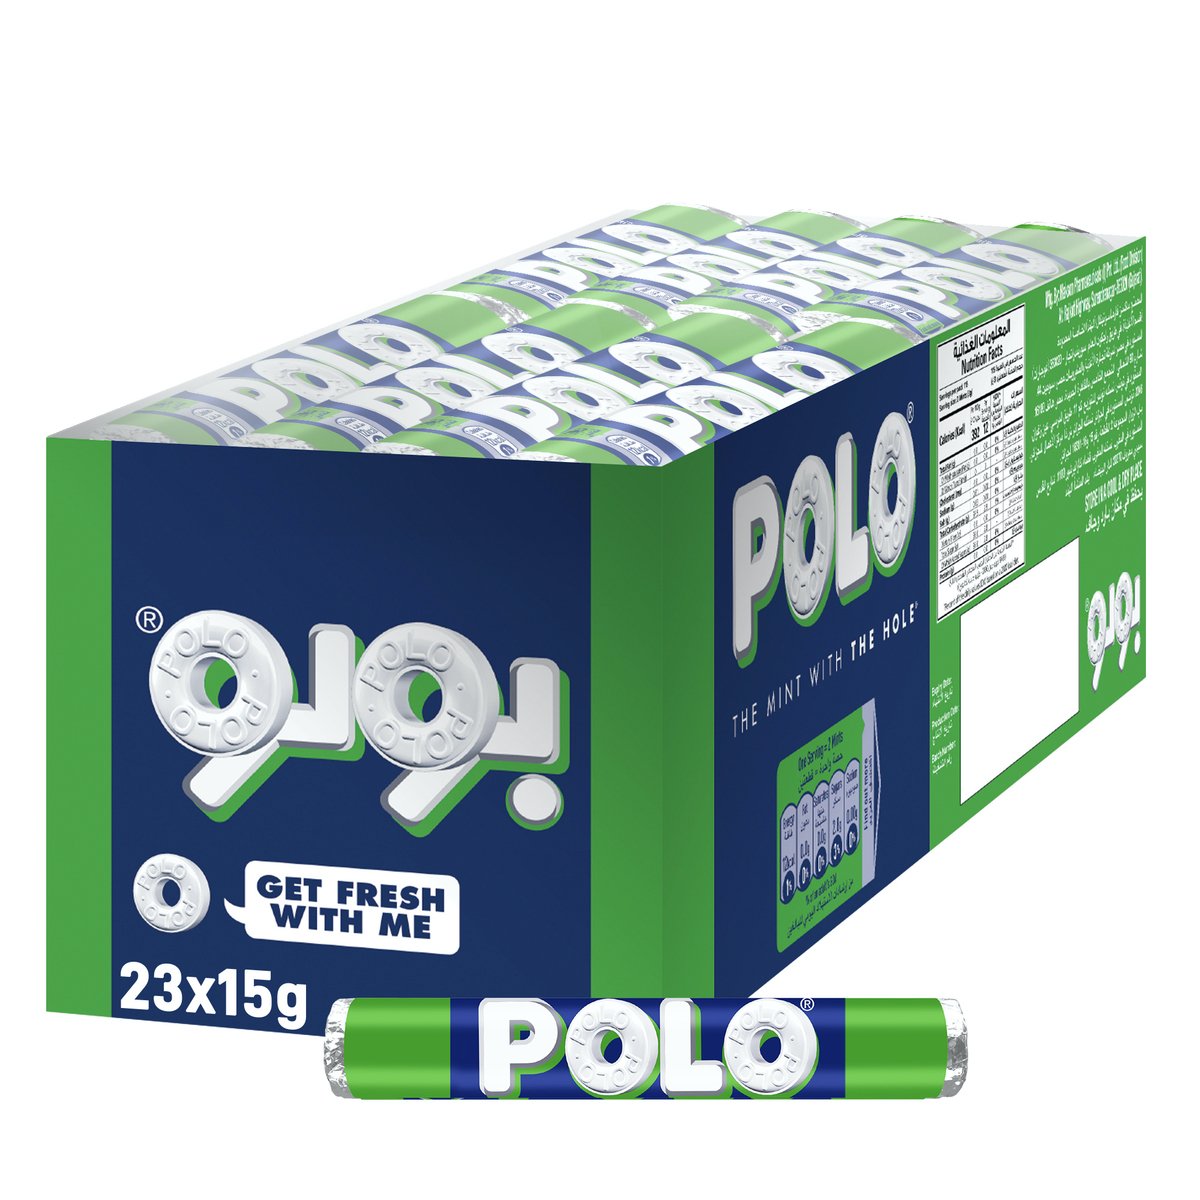 Nestle Polo Mint and Menthol Candy 23 x 15 g